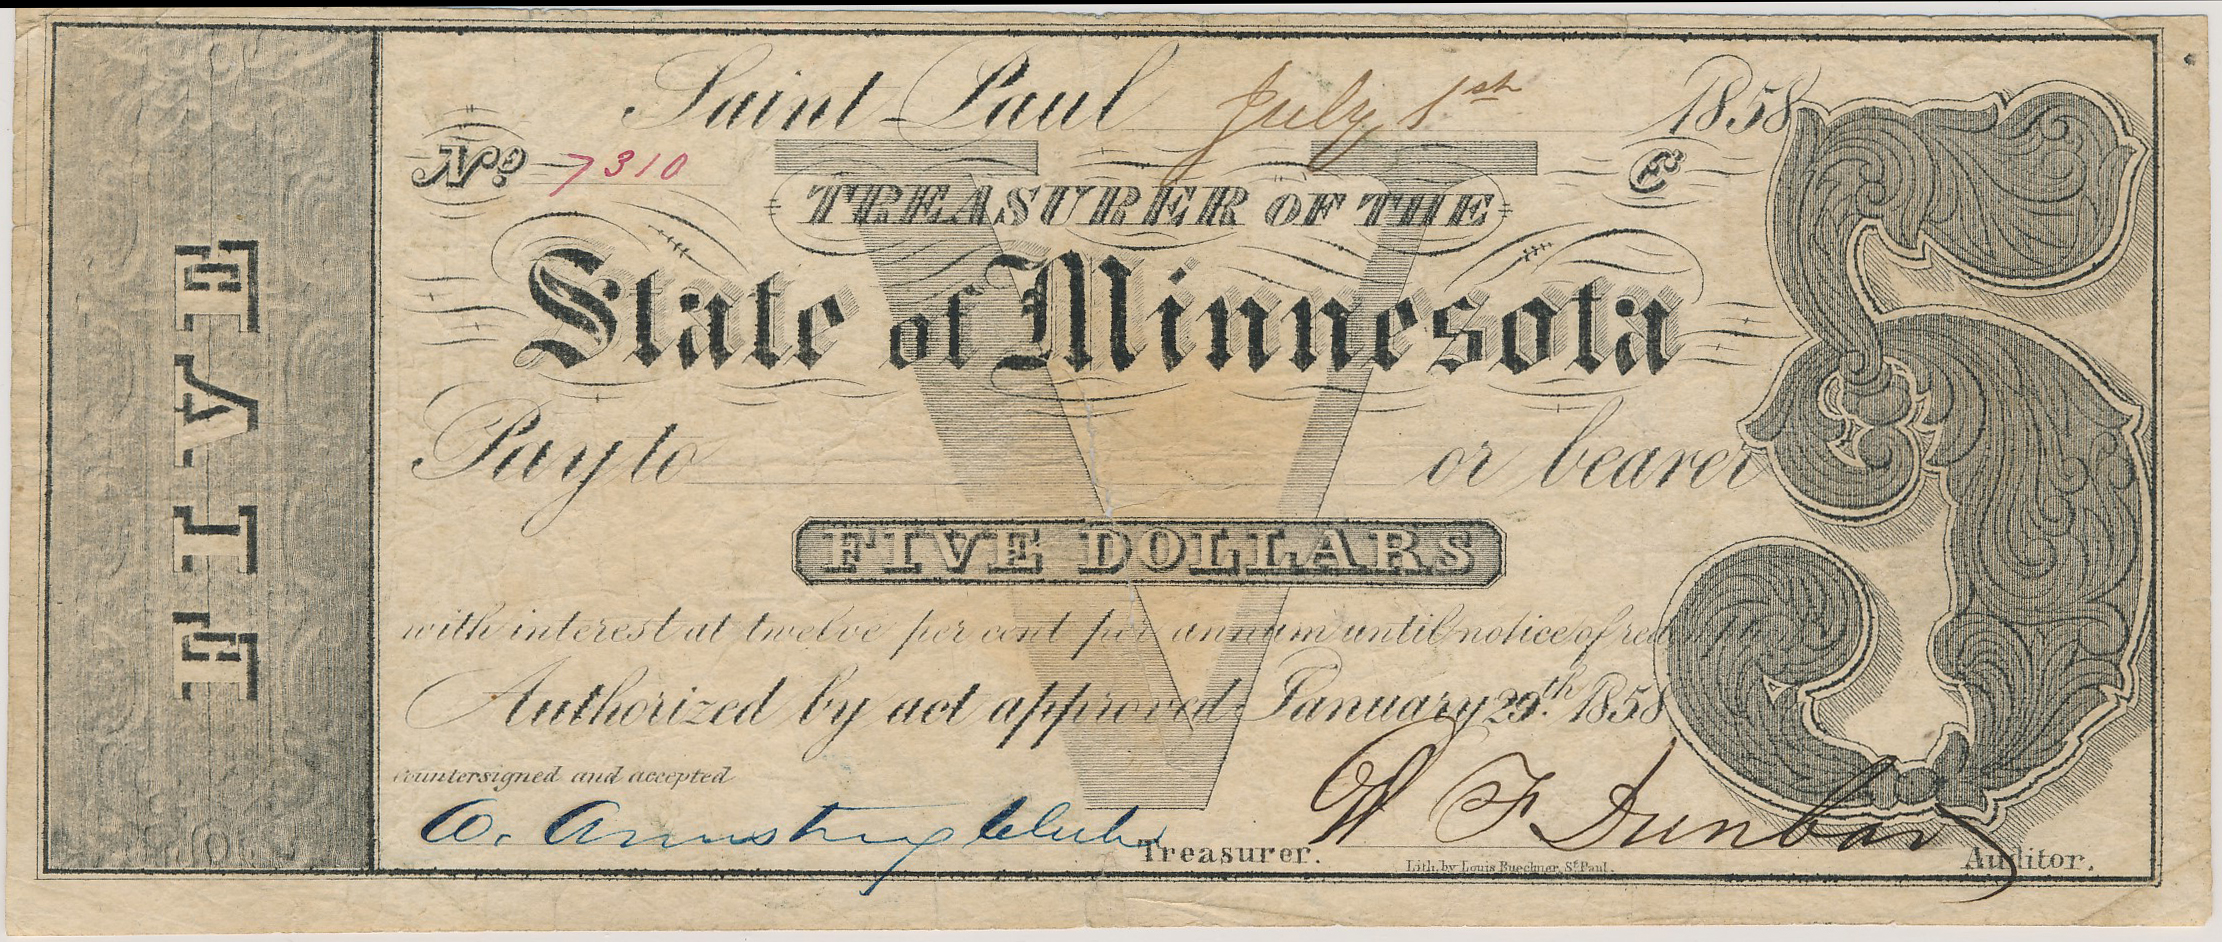 $5 Treasurer of the State of Minnesota (Second Plate)